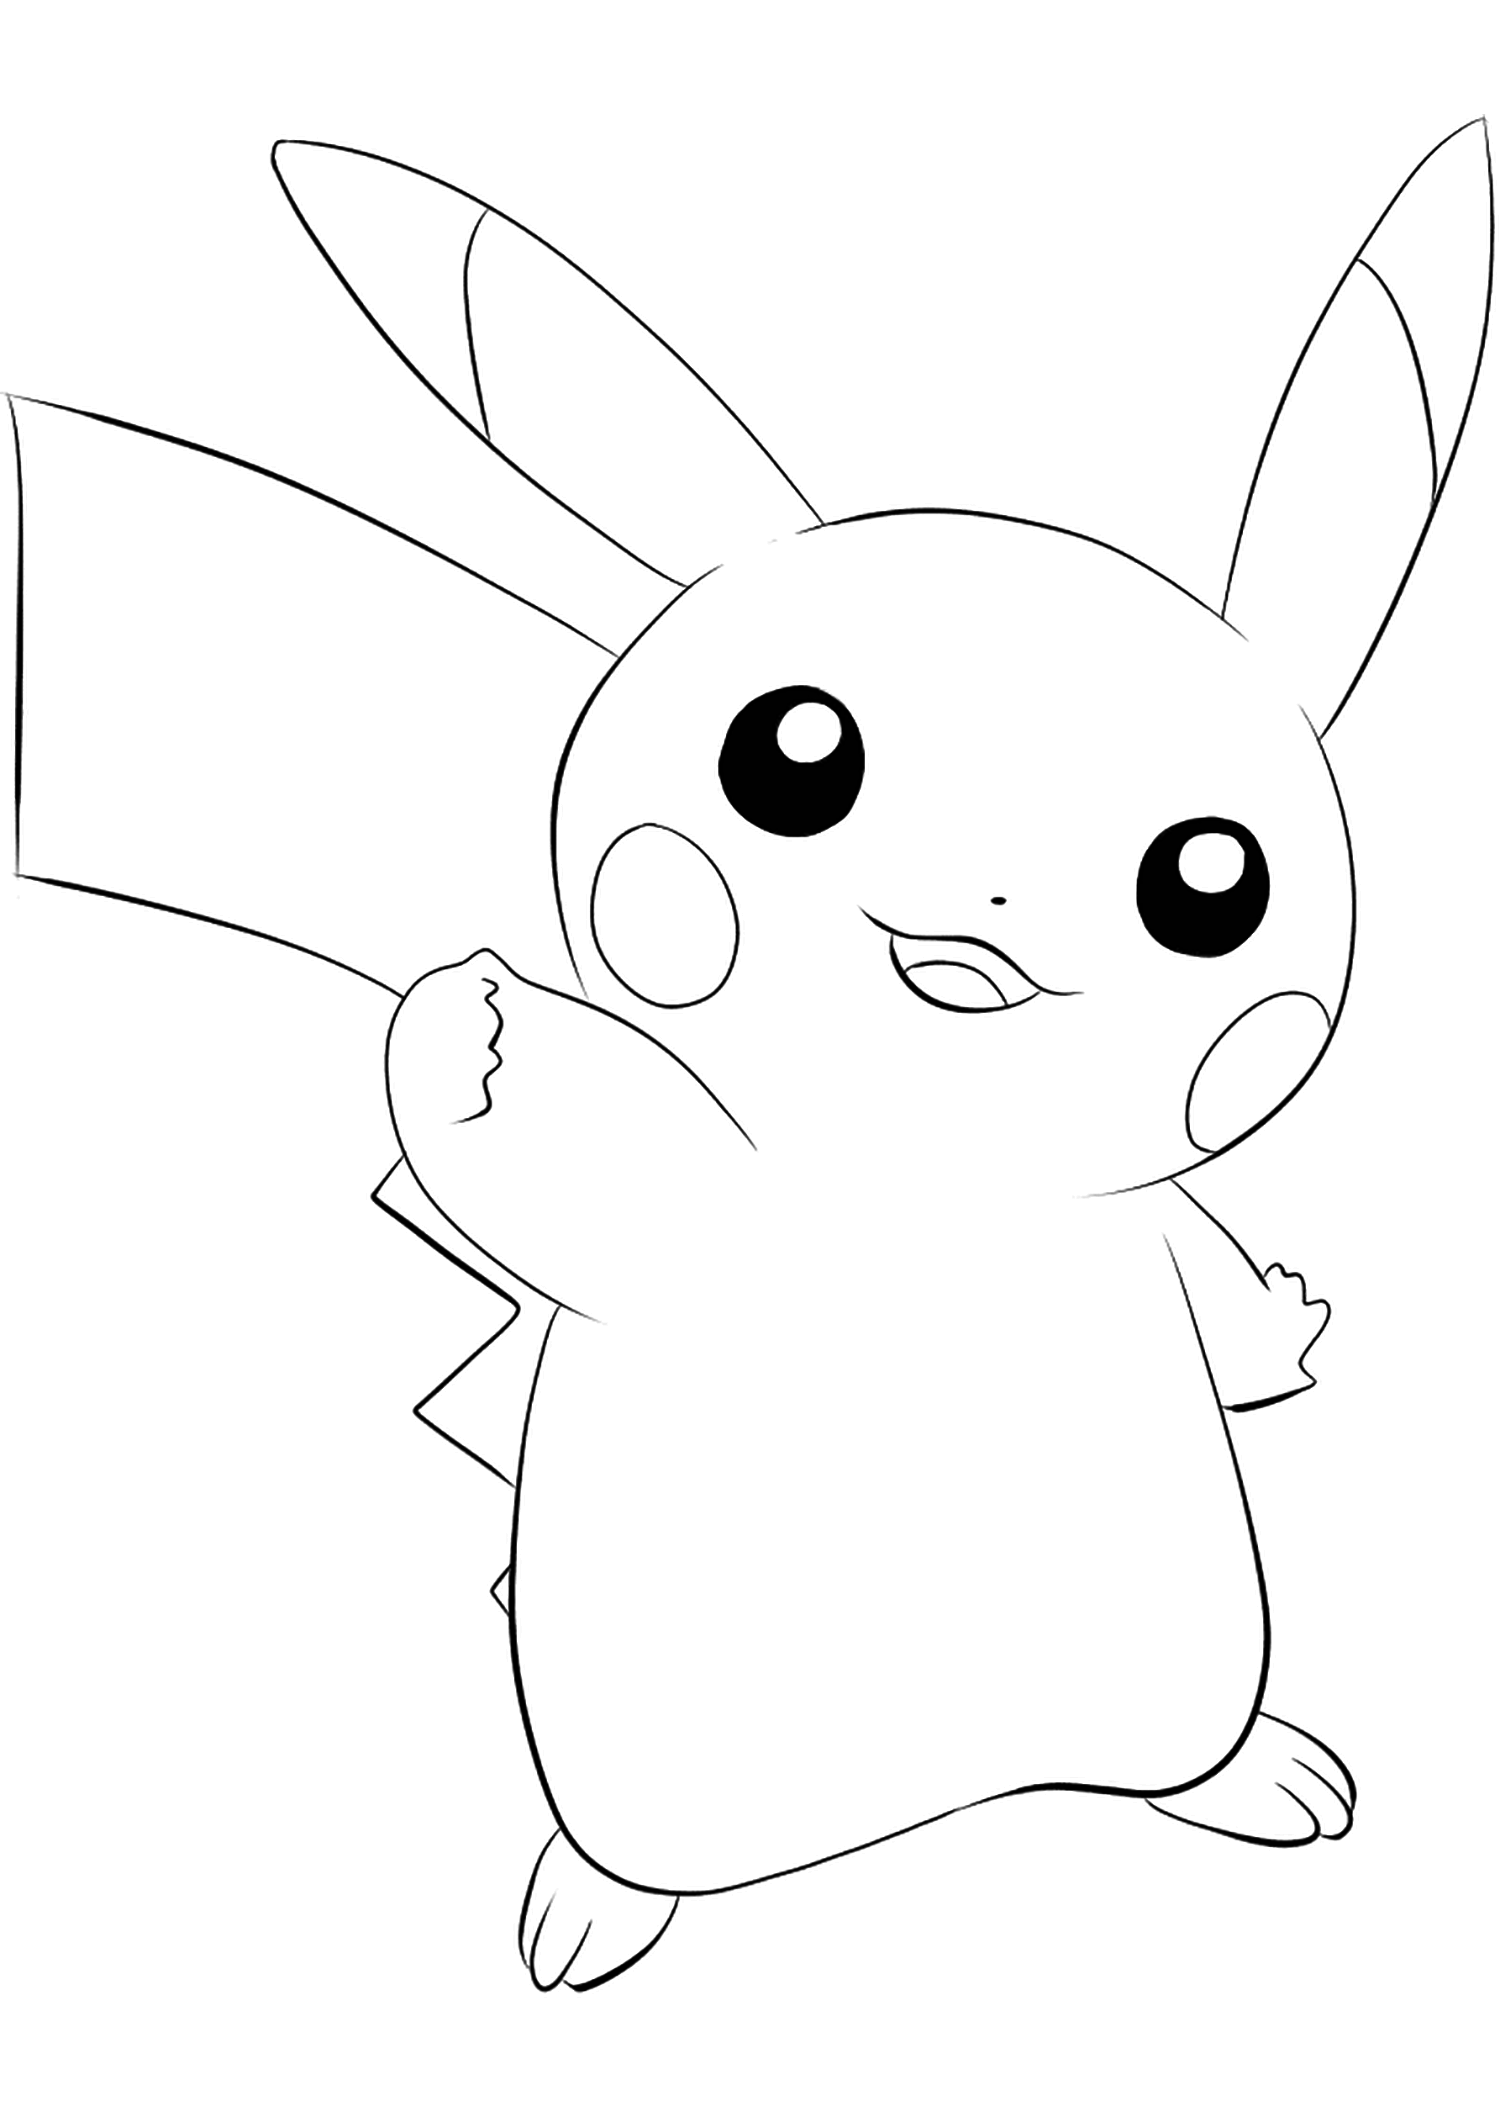 Pikachu Pokemon coloring page  Free Printable Coloring Pages